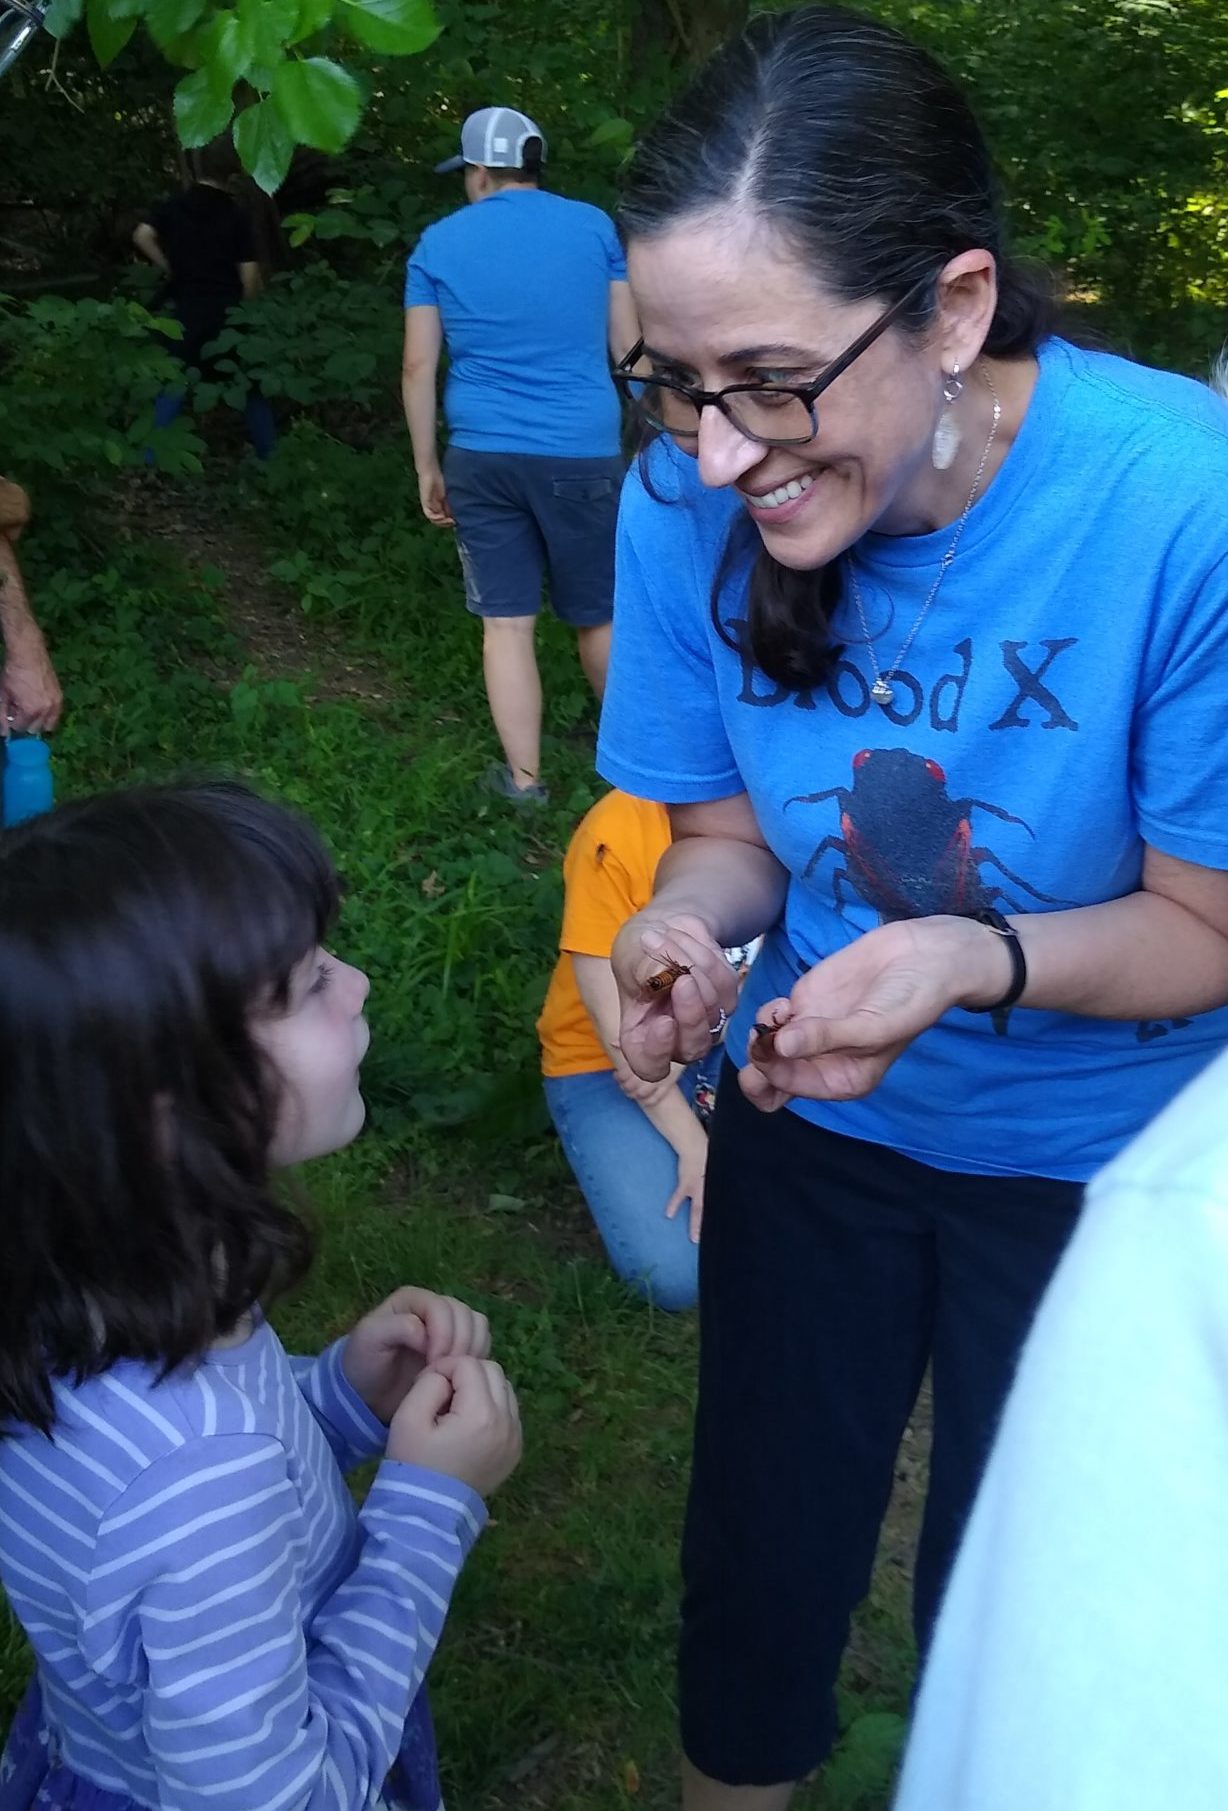 Diane answers a question from a young cicada fan